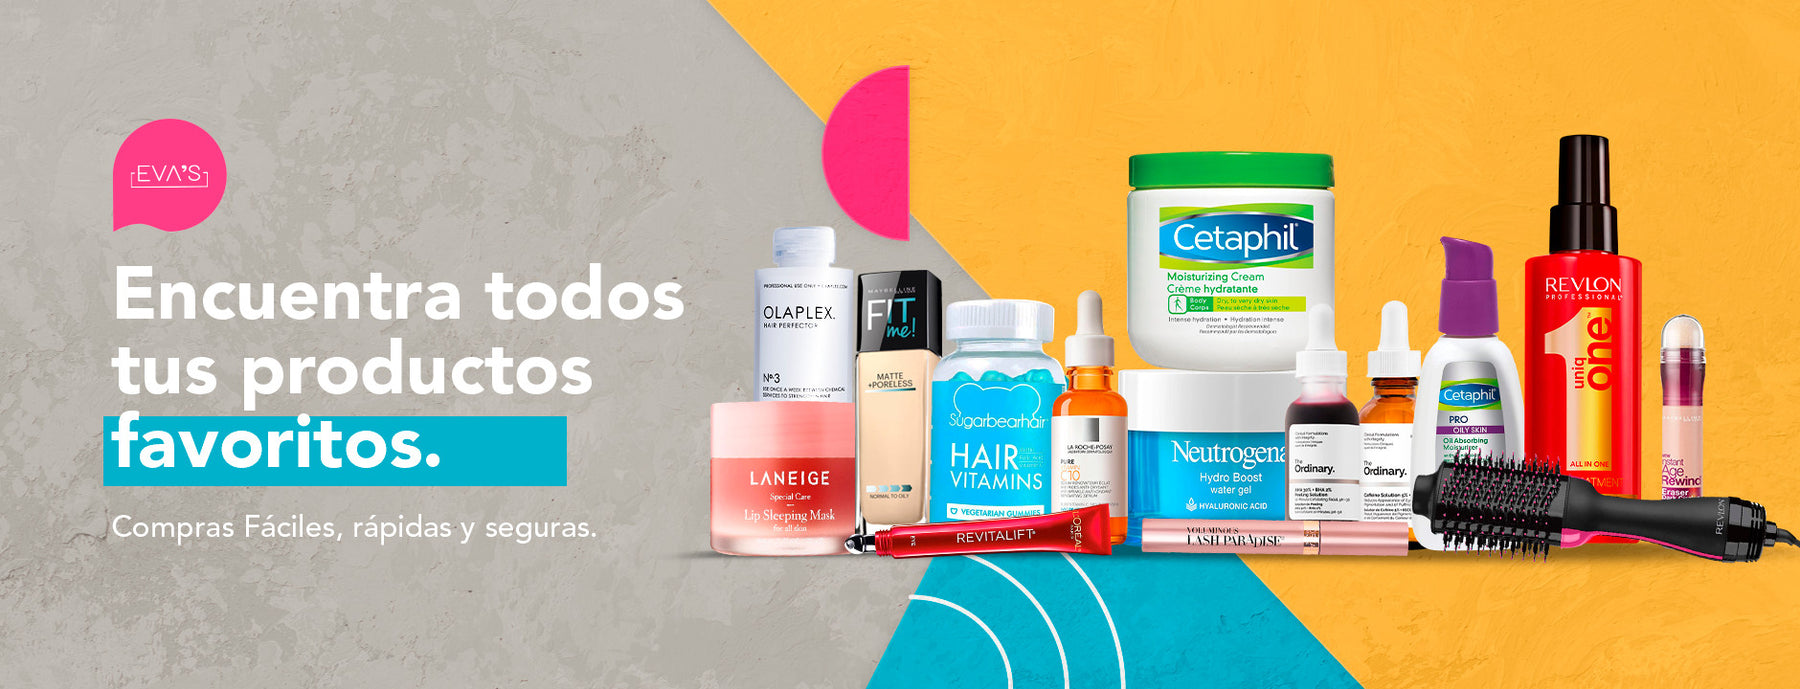 Cetaphil collection banner